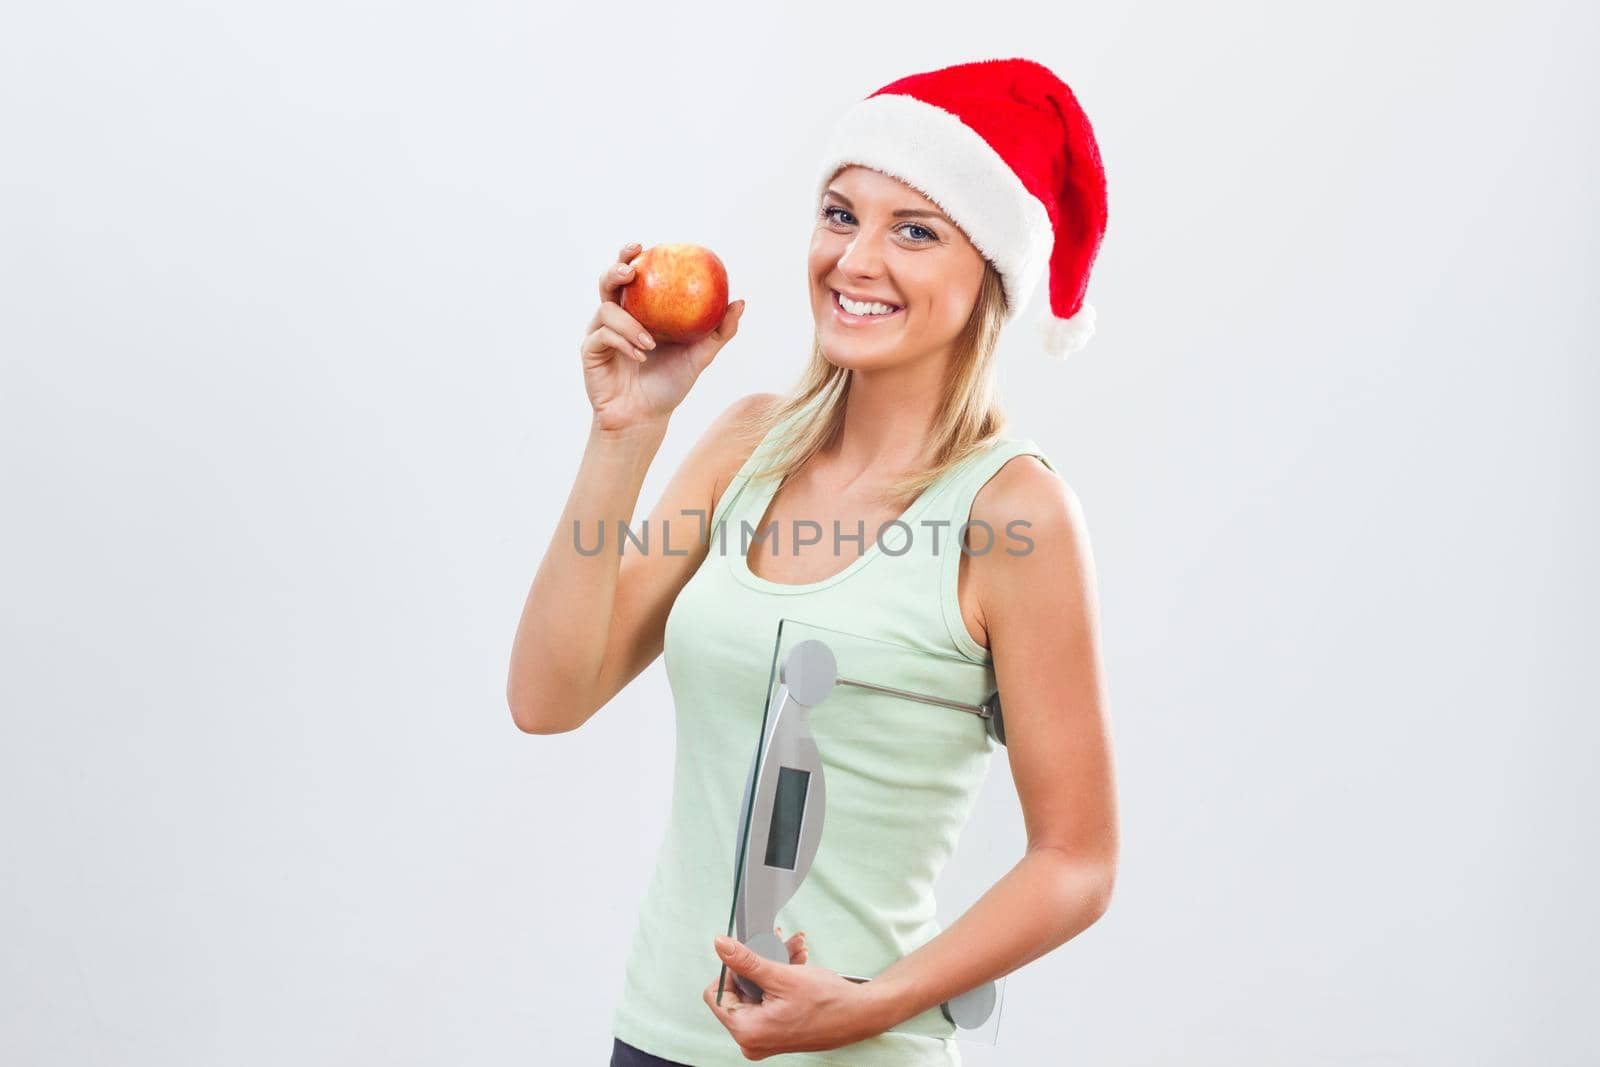 Healthy and fit for holidays by Bazdar